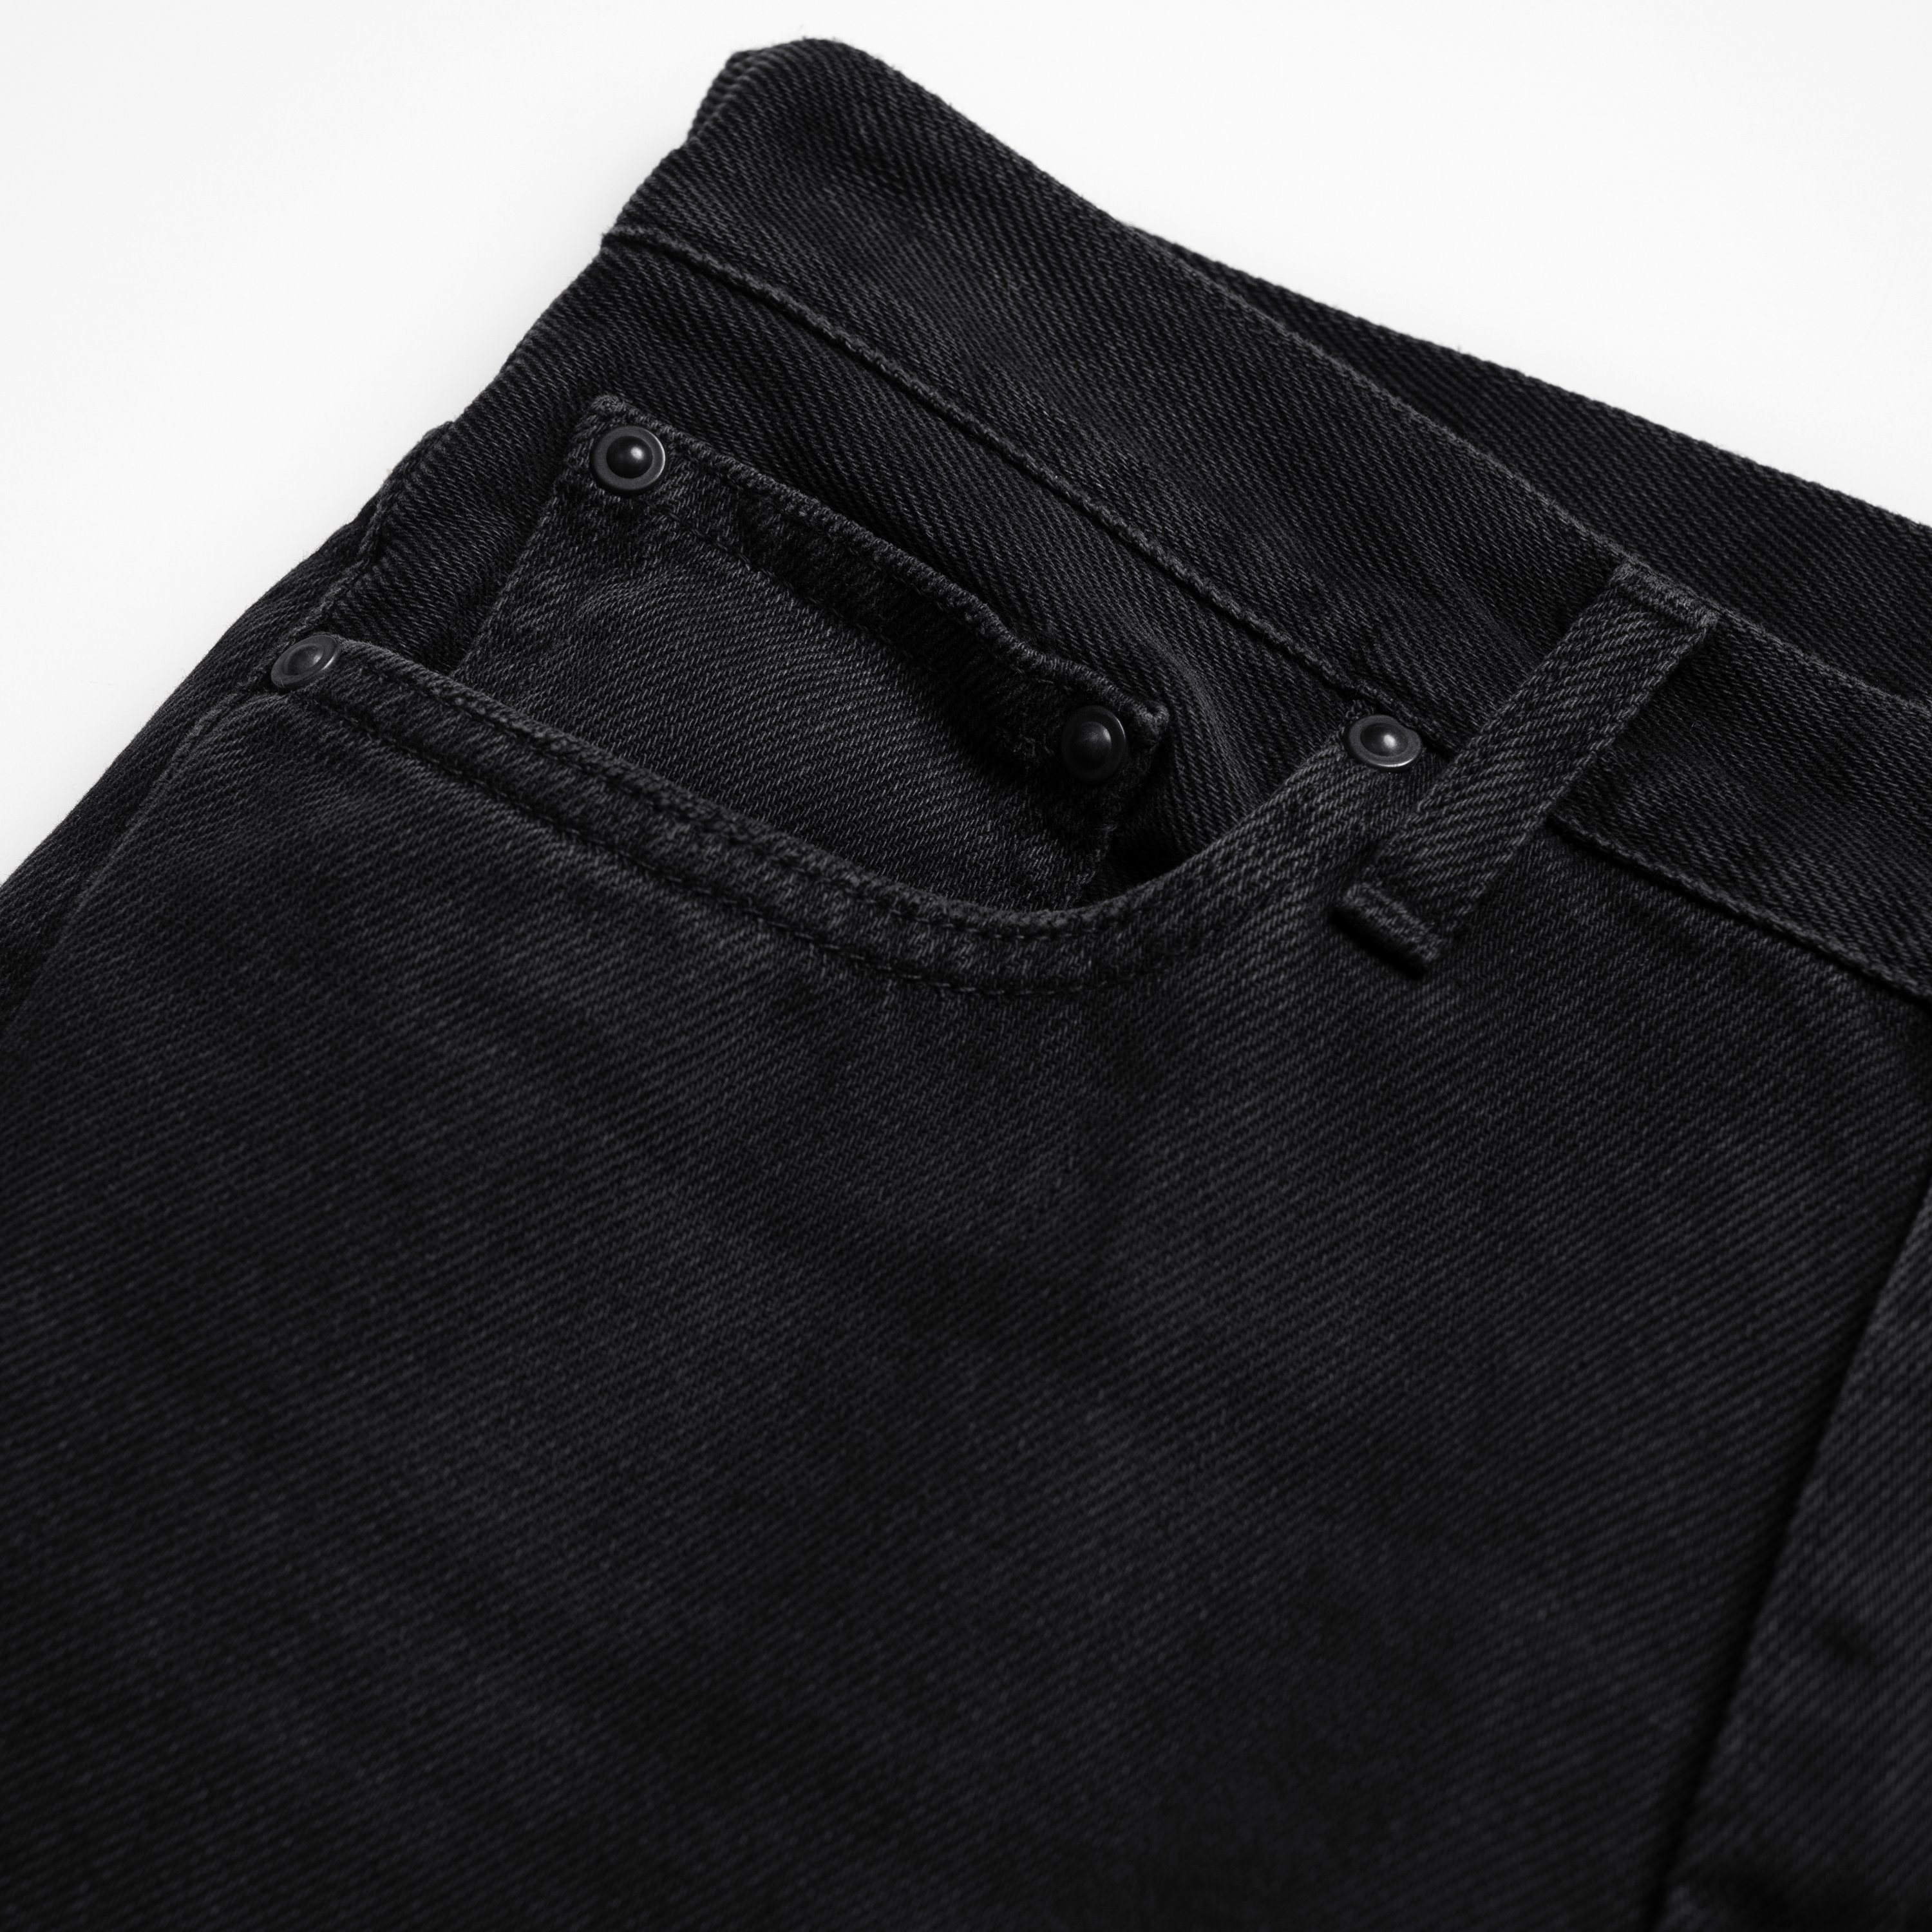 Carhartt WIP W' Page Carrot Ankle Pant | Carhartt WIP